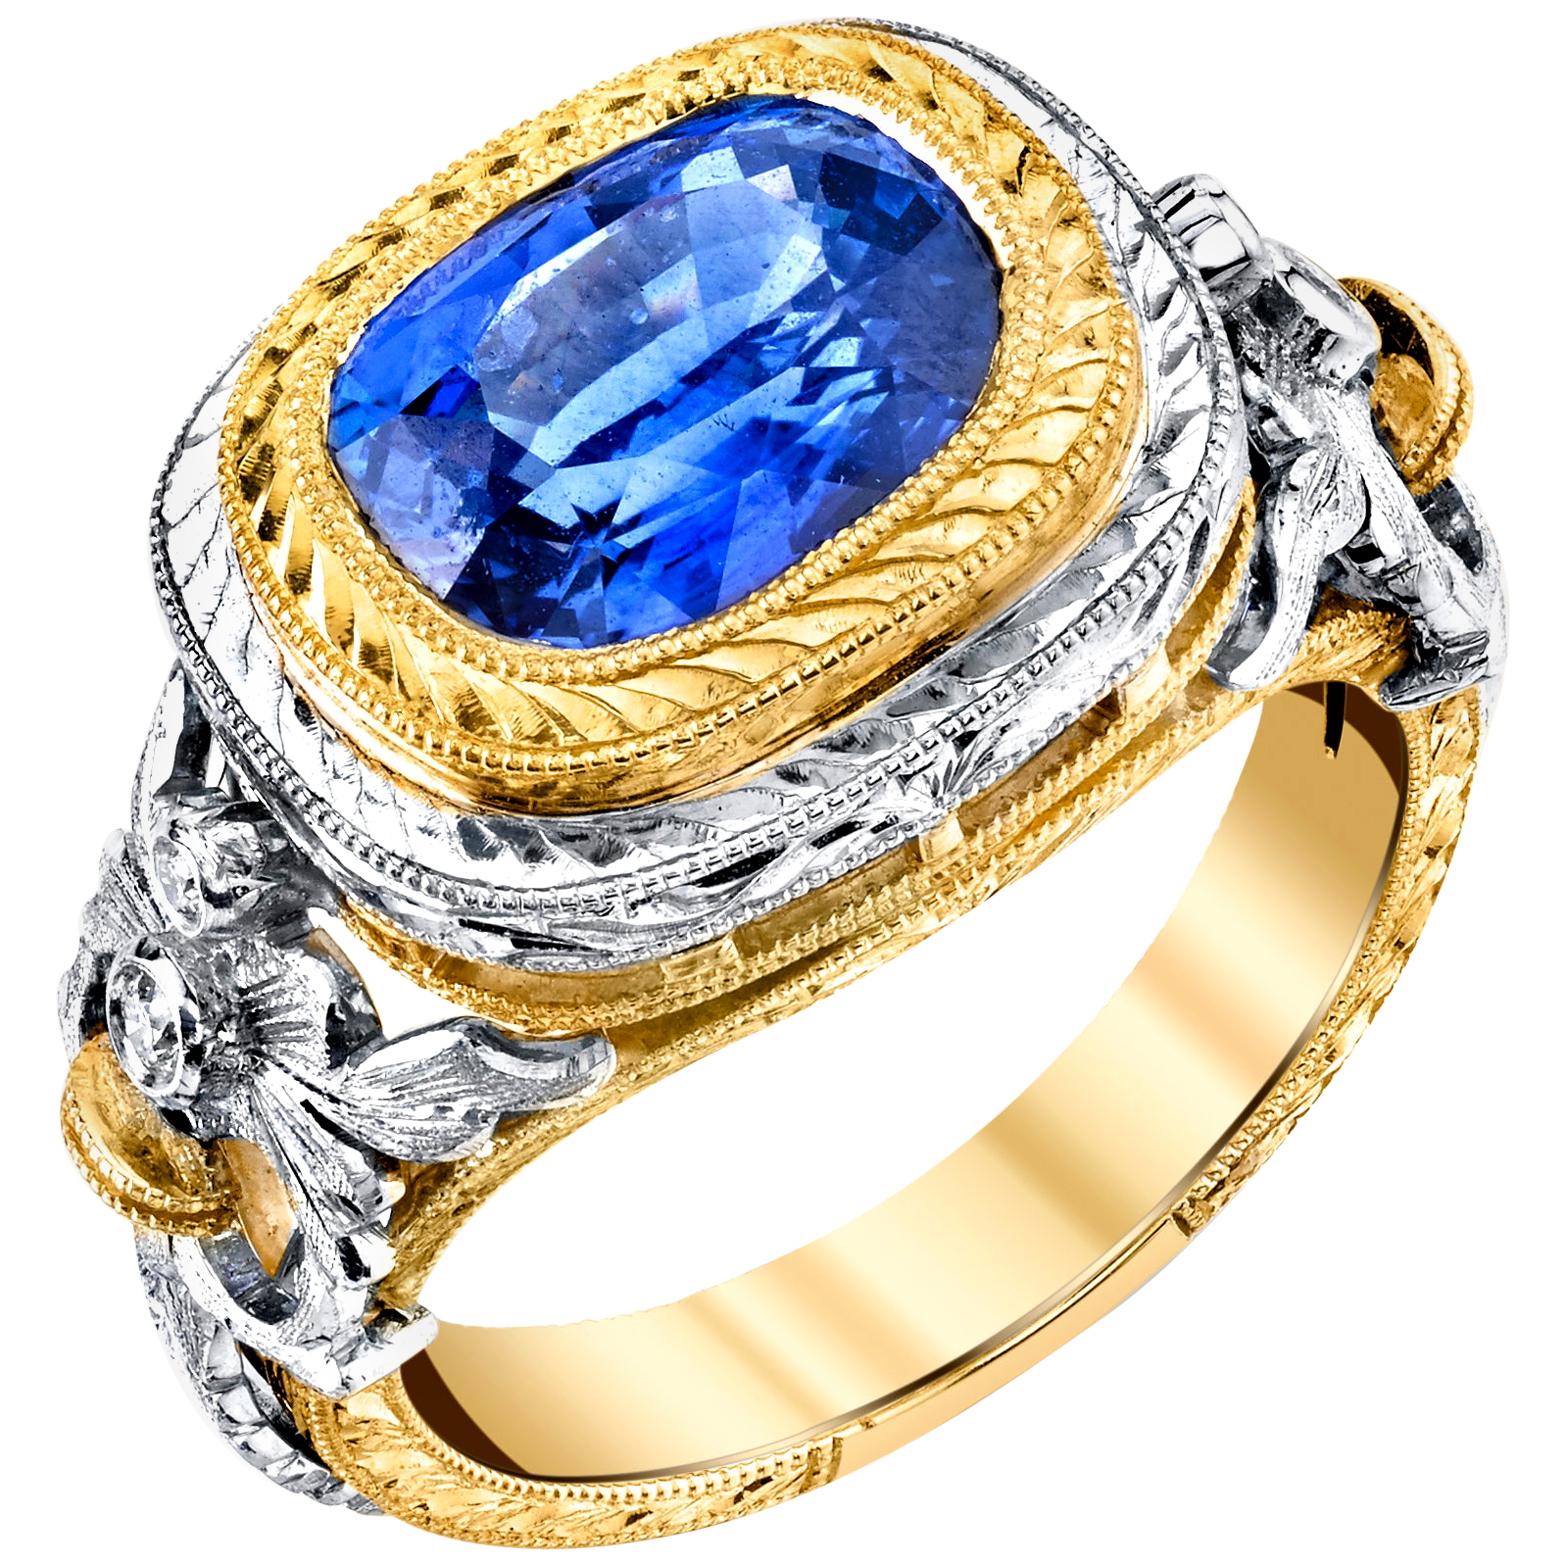 3.80 Carat Blue Sapphire and Diamond Ring, Handmade in 18k Yellow and White Gold For Sale